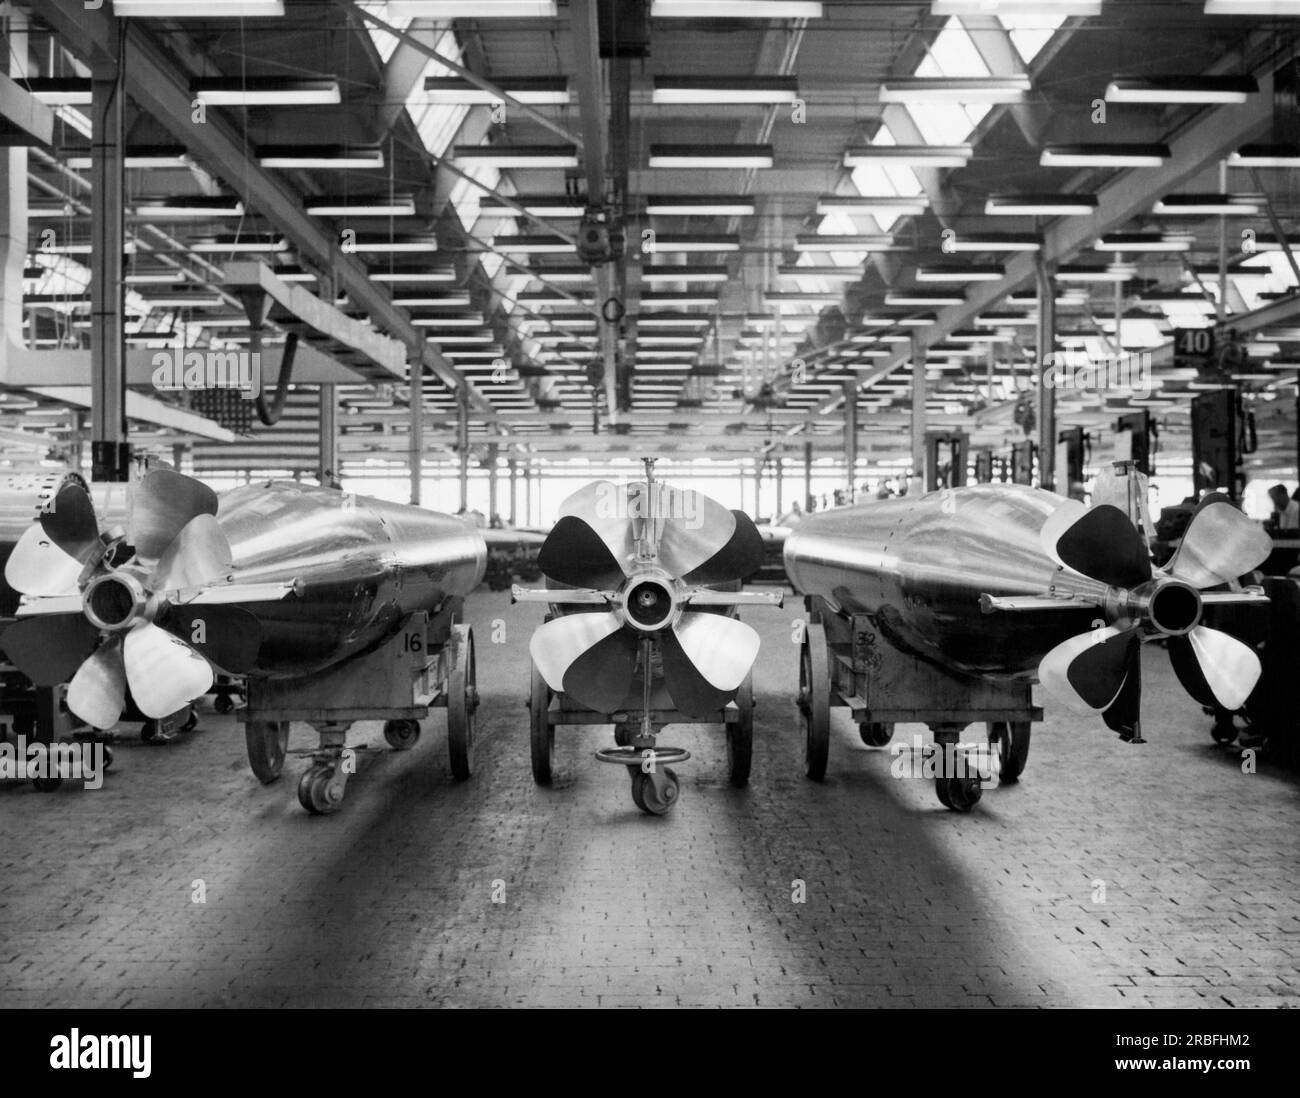 Forest Park, Illinois:  August 17, 1944 The back ends of the Mark 15 torpedos being manufactured at the Amertorp torpedo factory for US Navy submarines to use against the Japanese fleet. Stock Photo